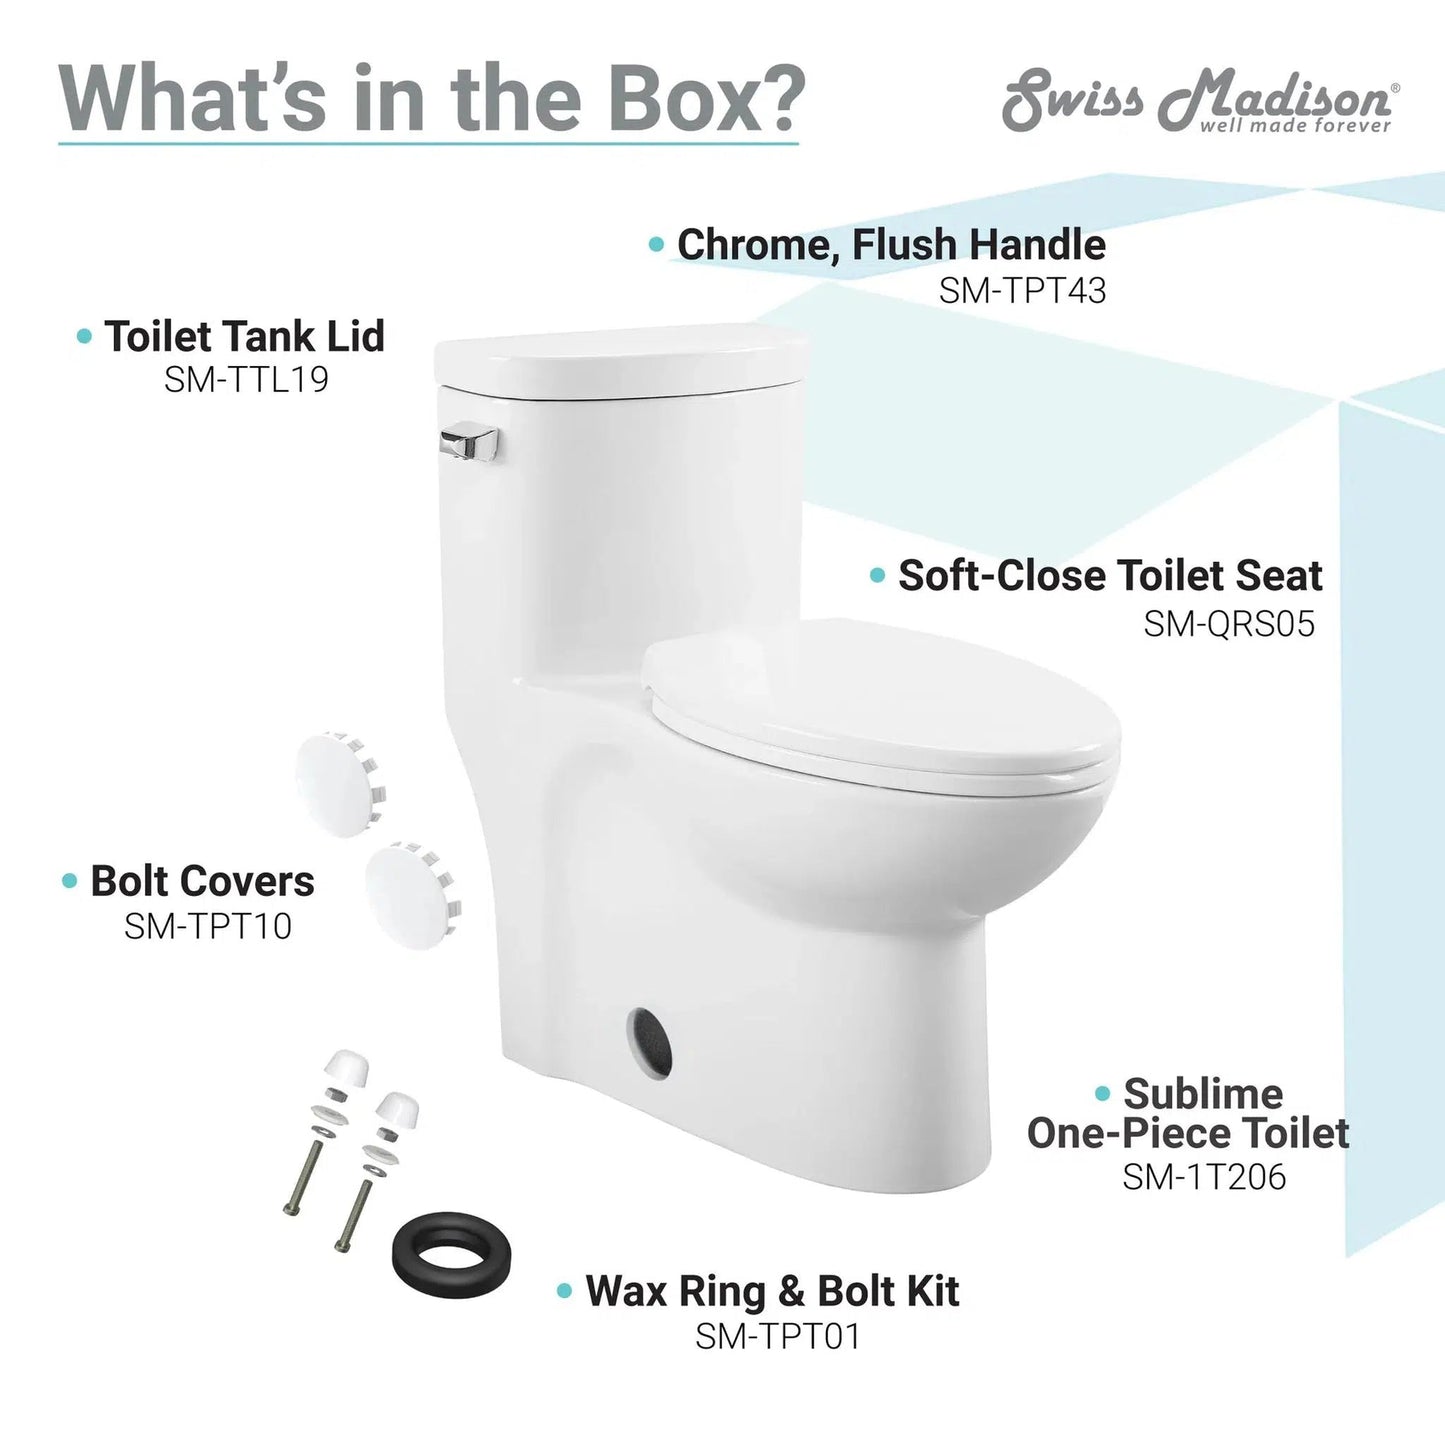 Swiss Madison Sublime 16" x 28" White One-Piece Elongated Floor Mounted Toilet With 1.28 GPF Side Flush Function